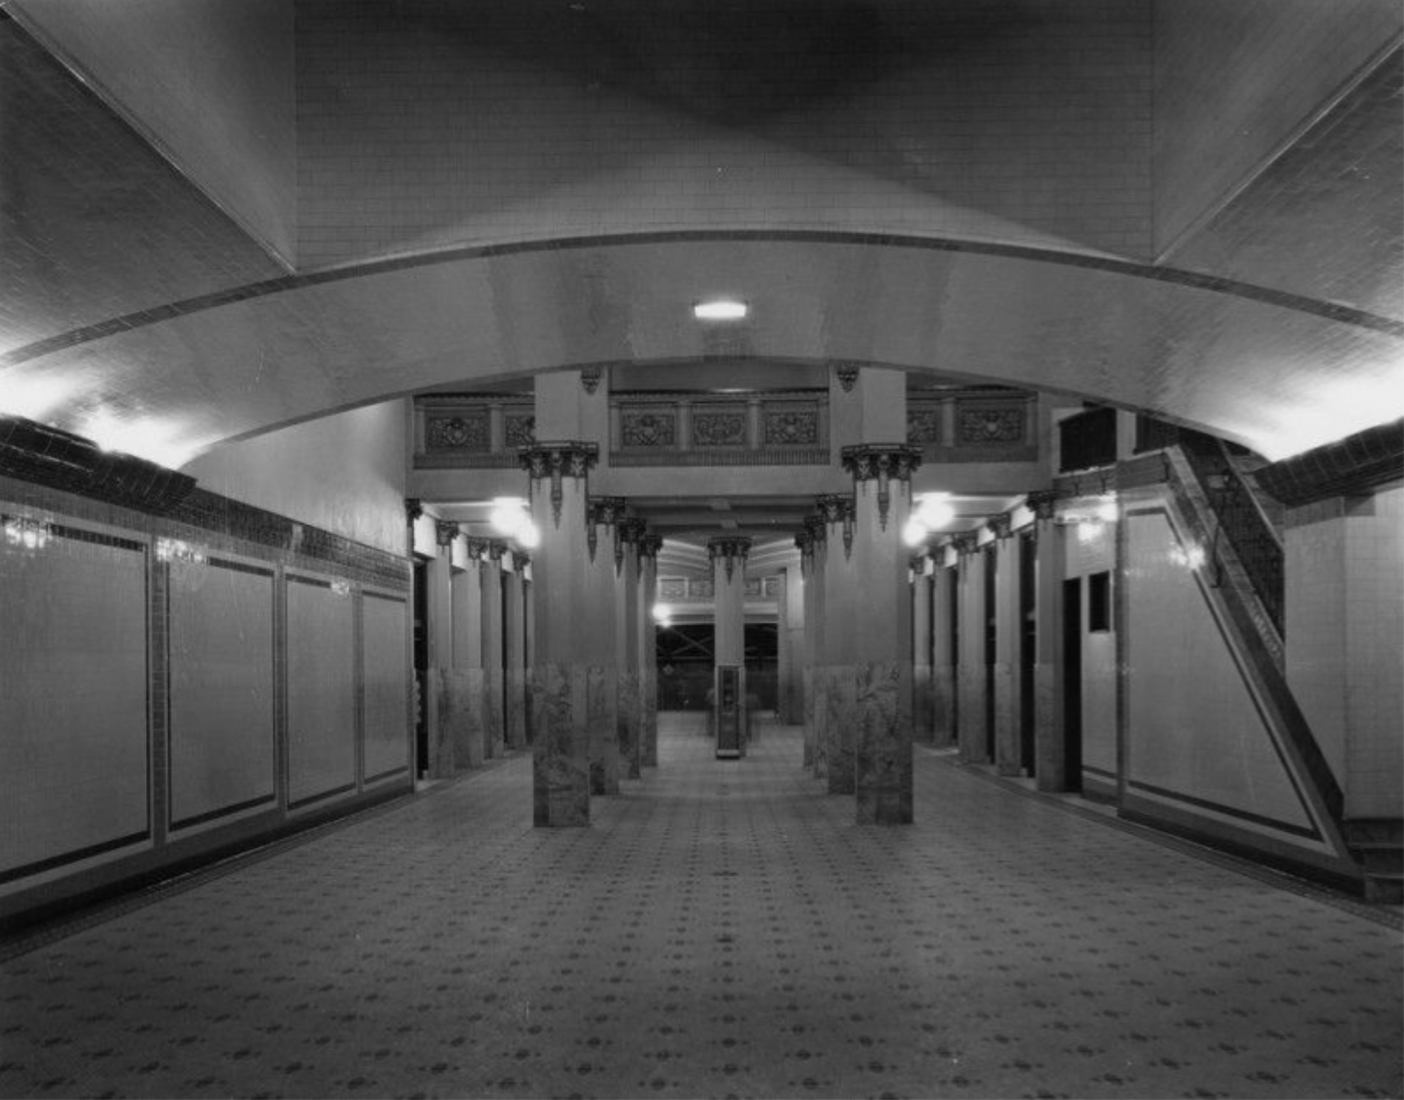 A view of Jergins Subway, a pedestrian walkway that ran under the busy intersection of Ocean Blvd. & Pine Ave. from 1927-1967. The tunnel ran under Ocean Boulevard and connected with the Jergins Arcade which was also a walk-through with a series of shops along the way and opened at the far end onto the Pike Amusement Park. The floor is paved with mosaic tiles and the walls with ceramic ones. The columns are capped with decorative friezes. The ceiling is slightly arched and a staircase is on the right. Los A